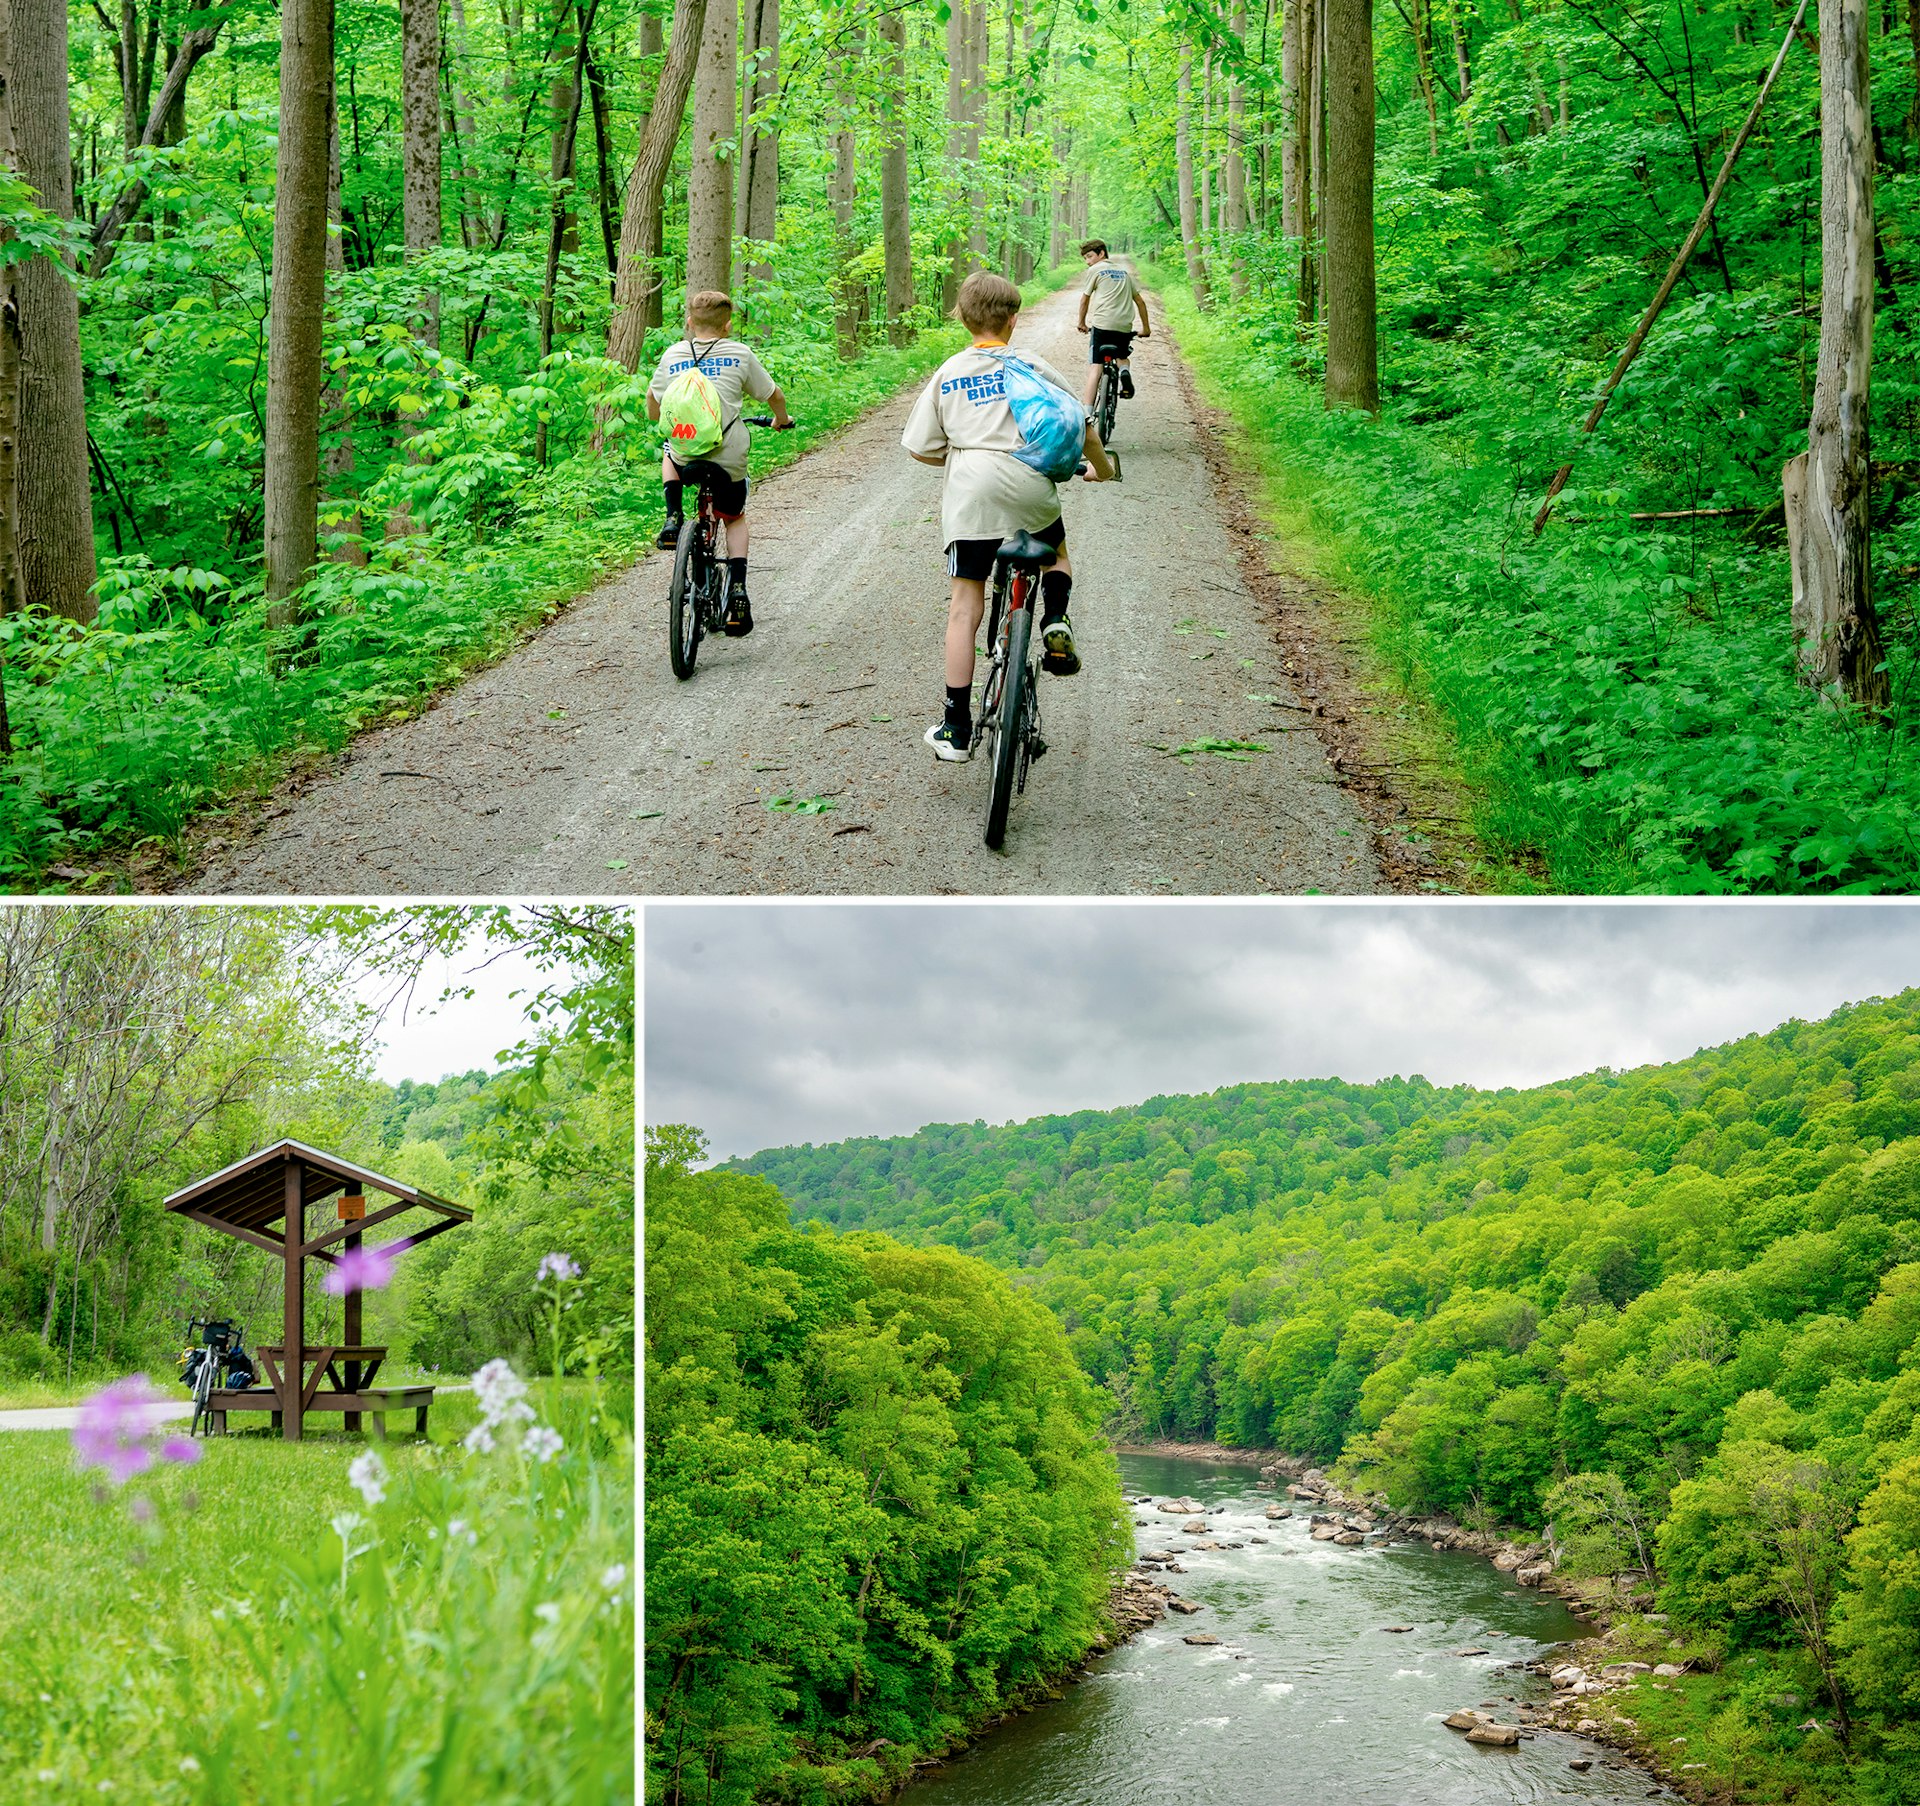 TOP: Kids riding their bikes through Ohiopyle State Park; LEFT: A park bench along the trail to rest; RIGHT: Rapids on Youghiogheny River